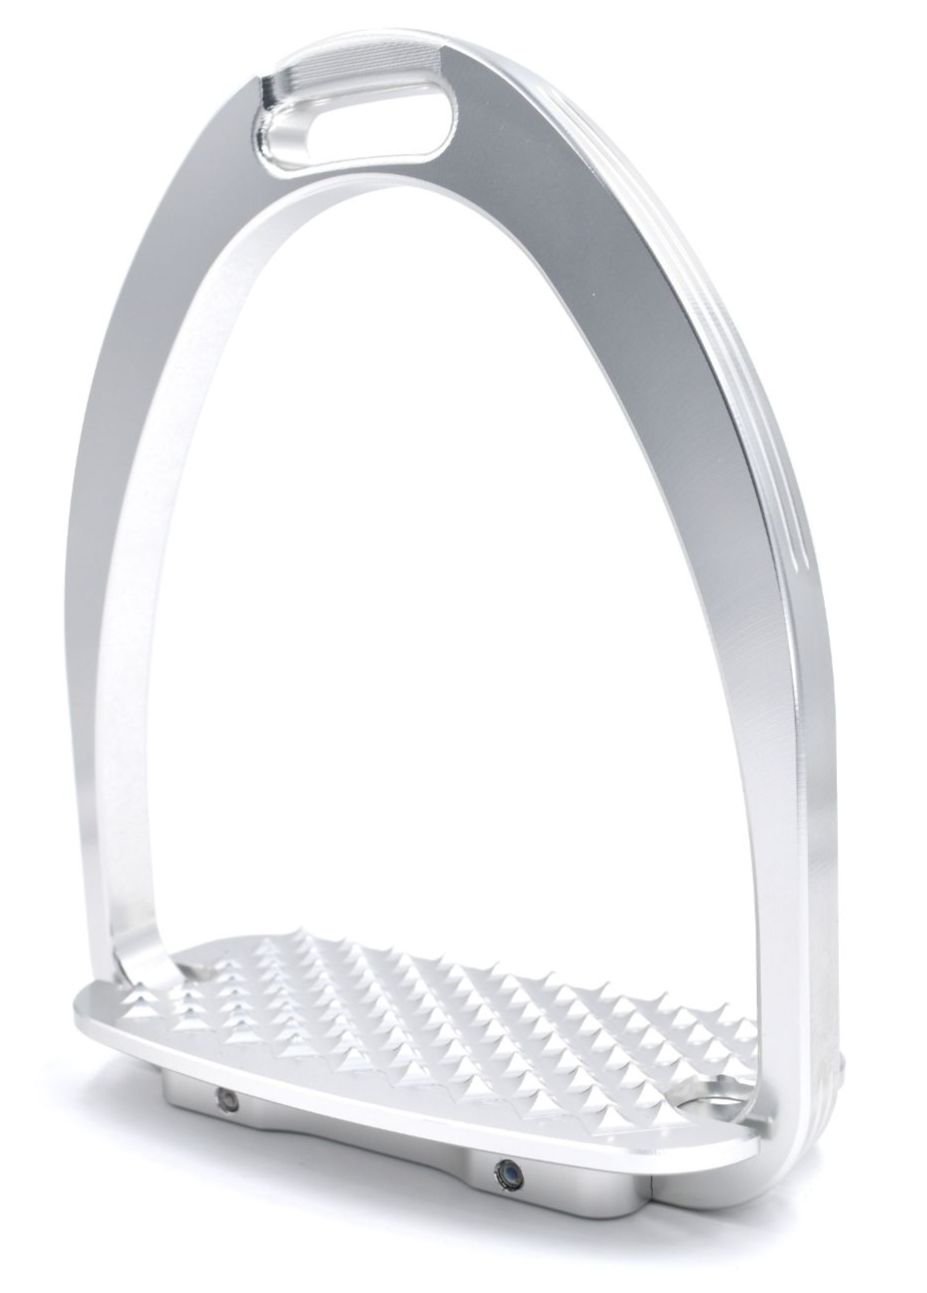 Tech Diana Classic Hunting Stirrups - Available In Black or Silver ...